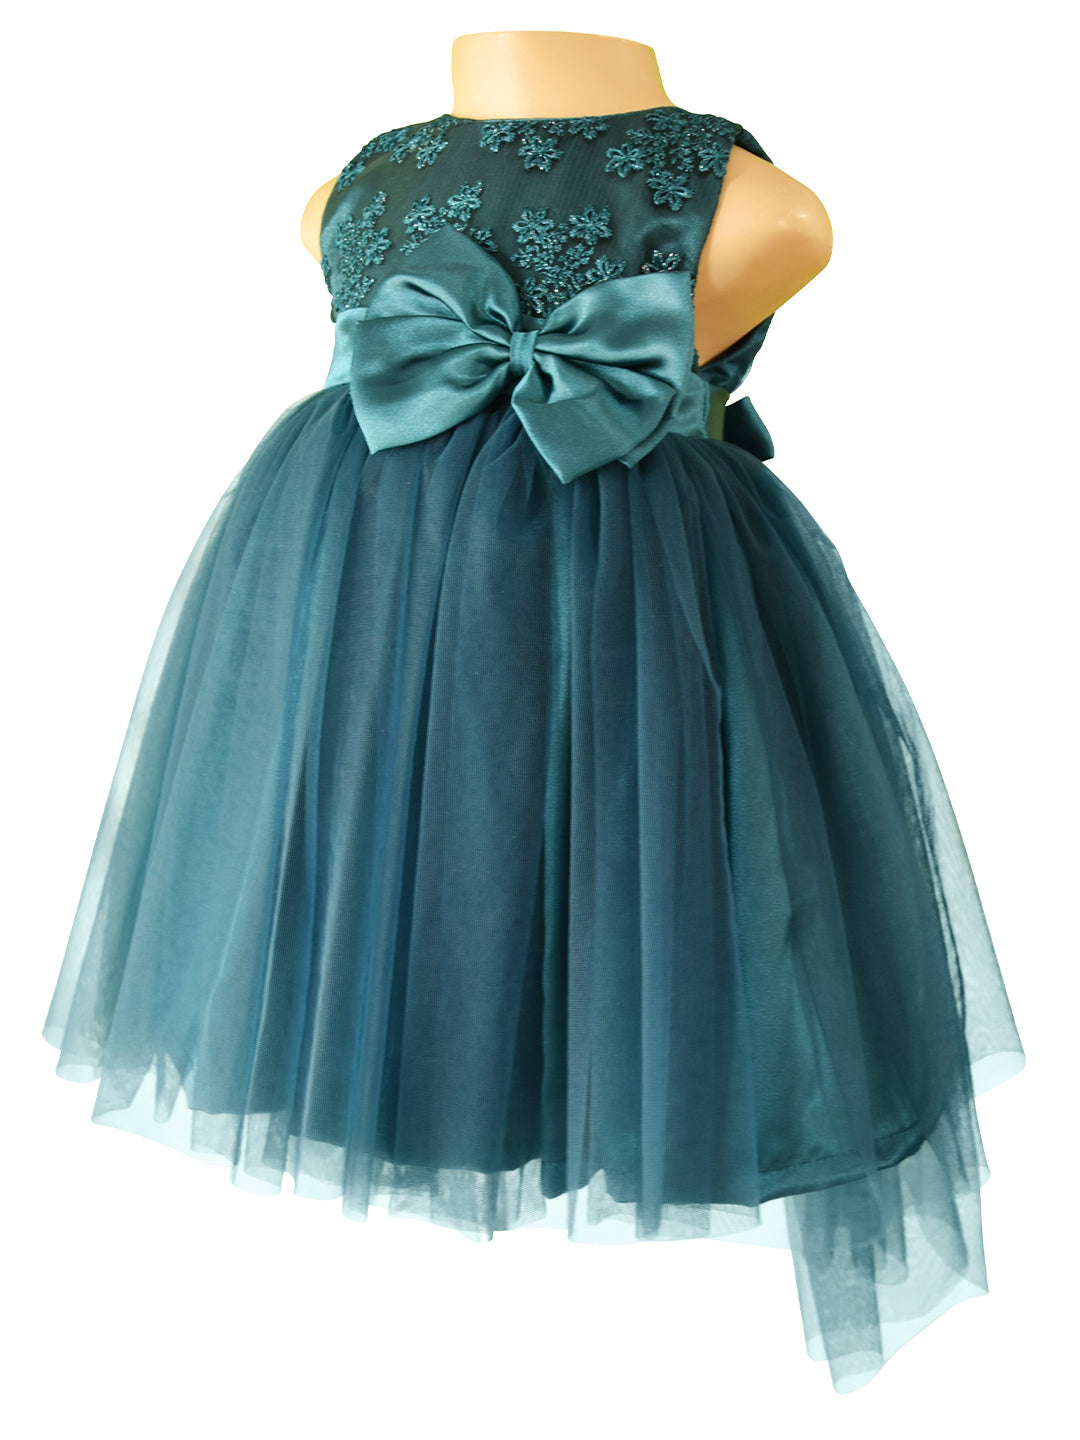 Party Dress for Girls_Faye Teal Green Hi-low Dress